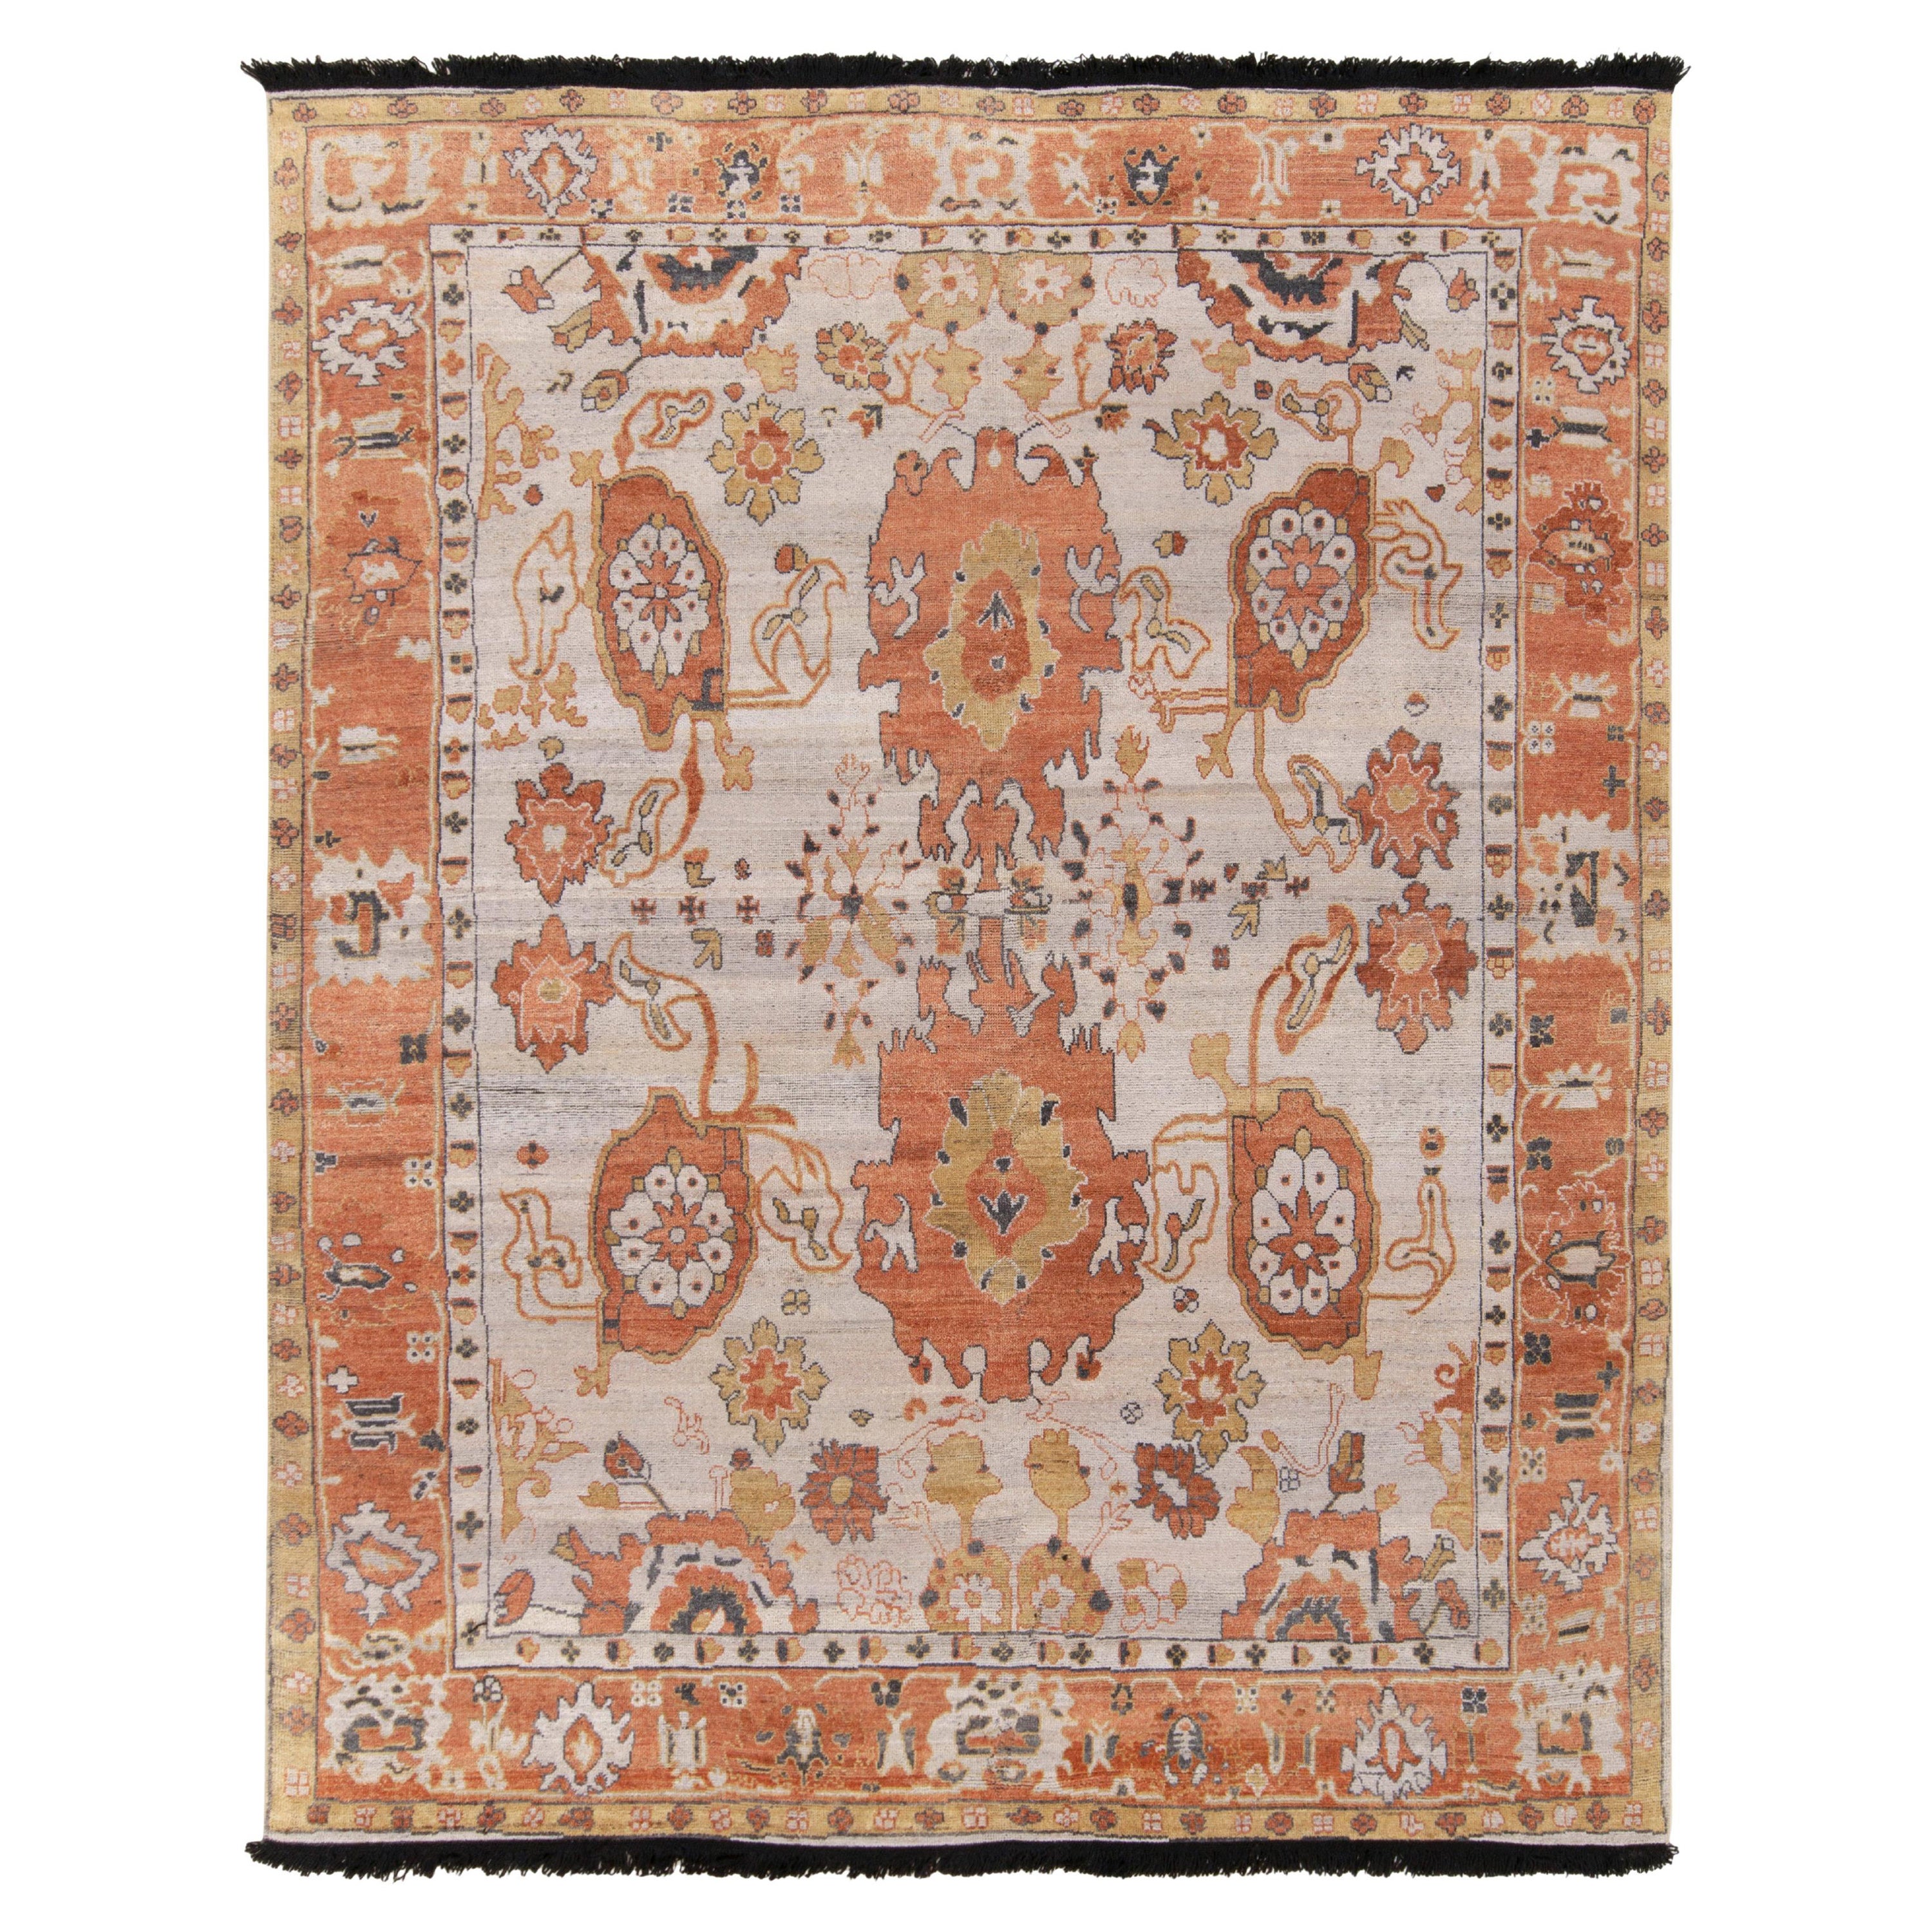 Rug & Kilim's 1900s Oushak Style Rug in White, Orange and Gold Floral Pattern For Sale